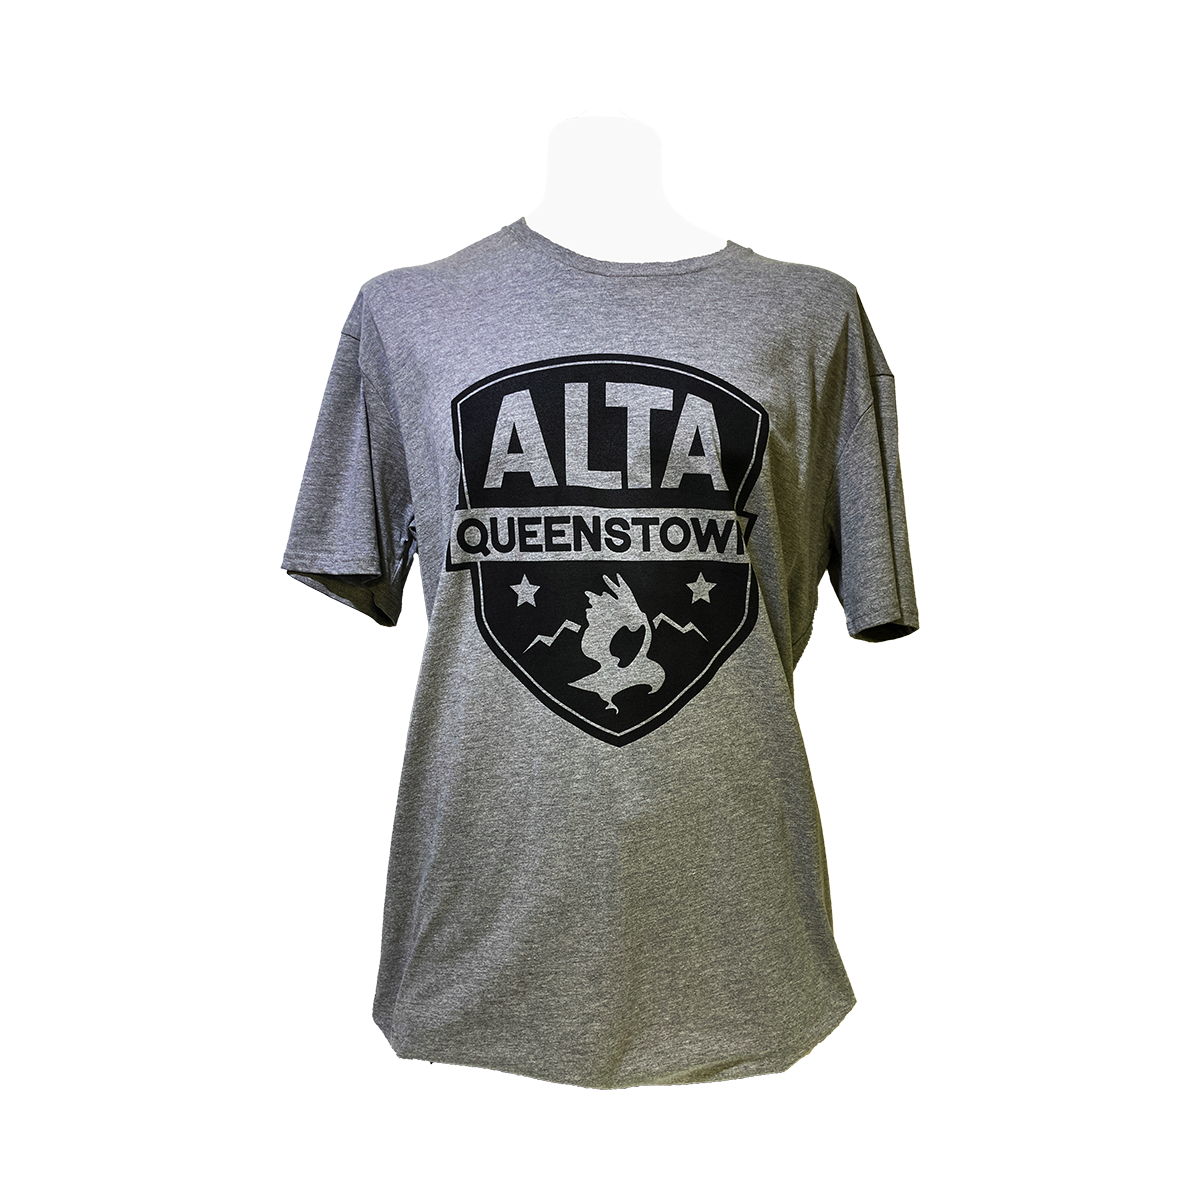 Alta Staple Tee - Large Patch - Grey Marle